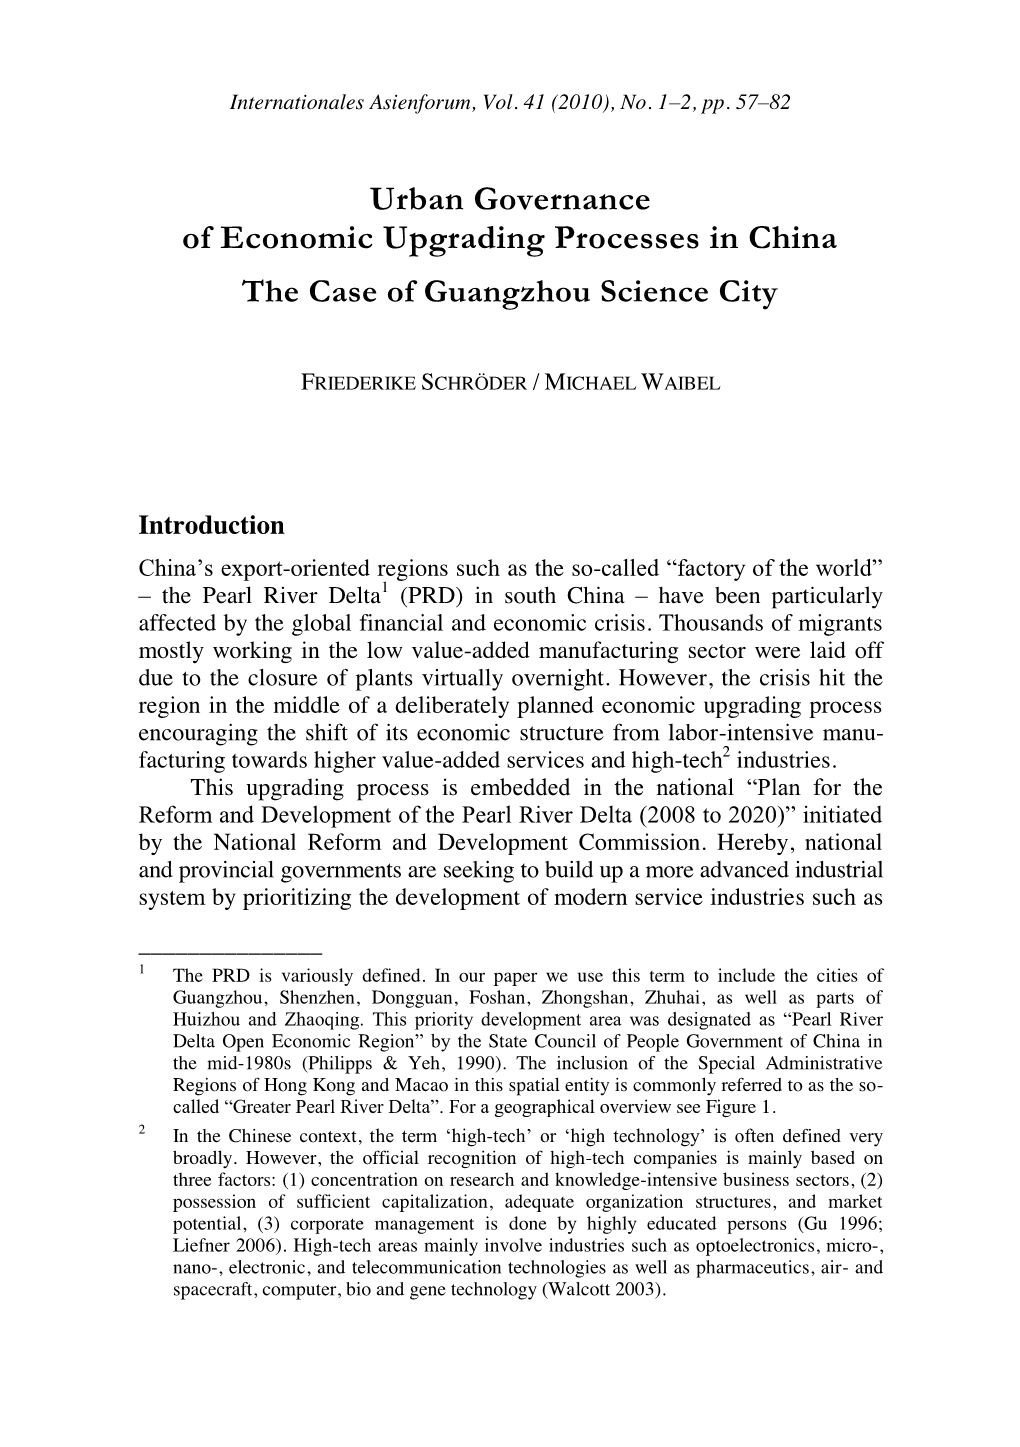 Urban Governance of Economic Upgrading Processes in China the Case of Guangzhou Science City